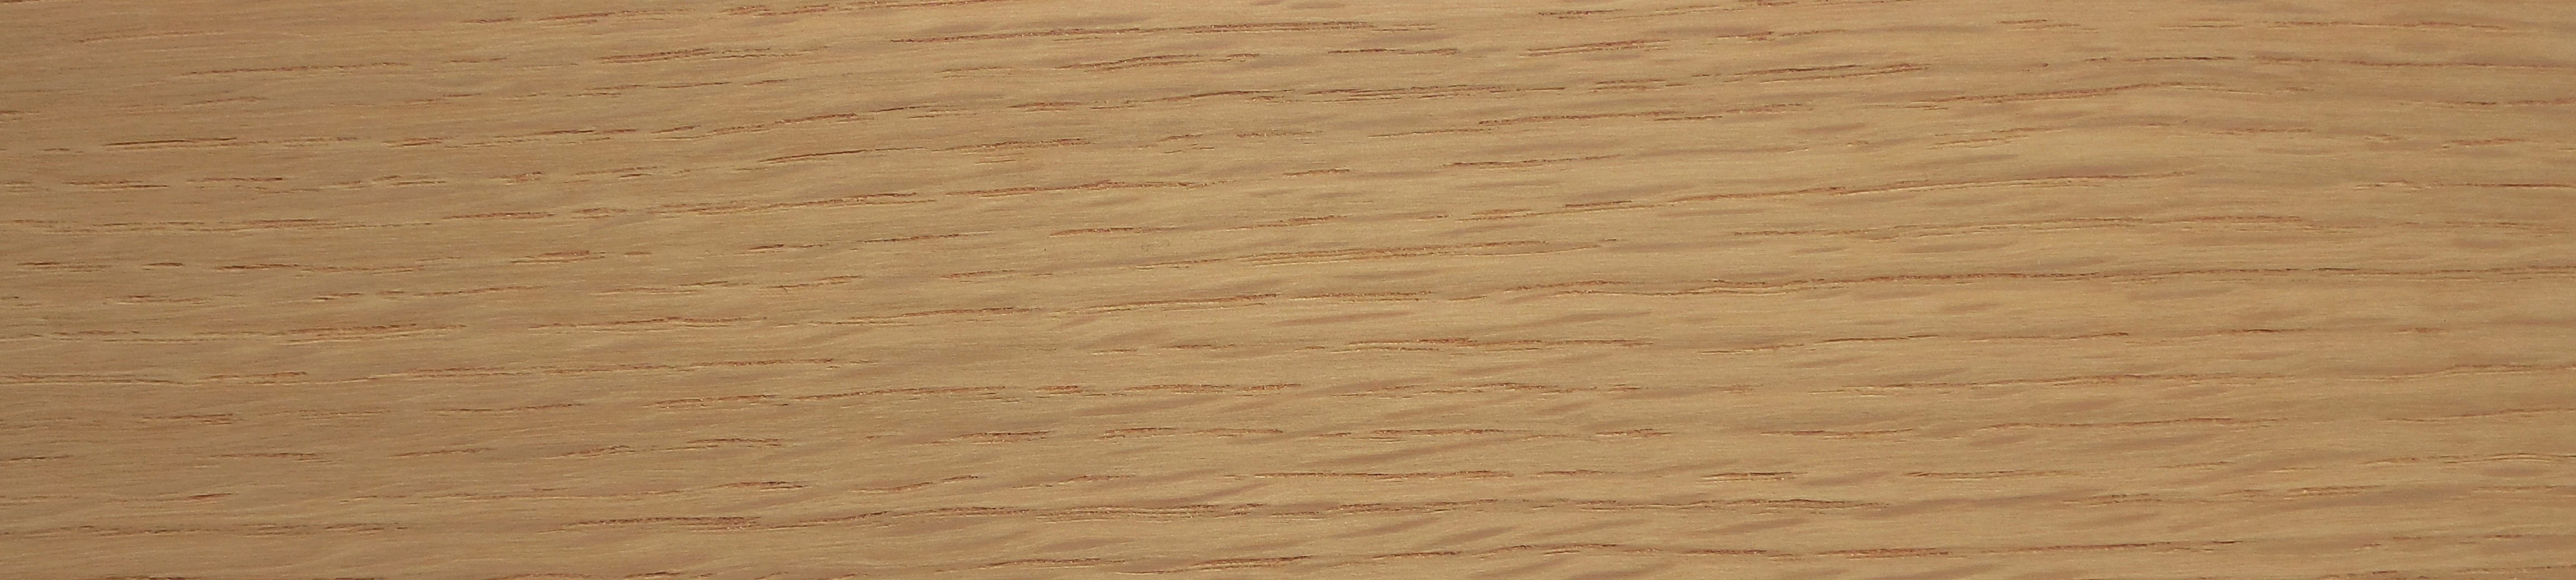 American White Oak Thickwood Unglued Edging / Lipping 2mm Thick Oak Wood Edging: Various Widths